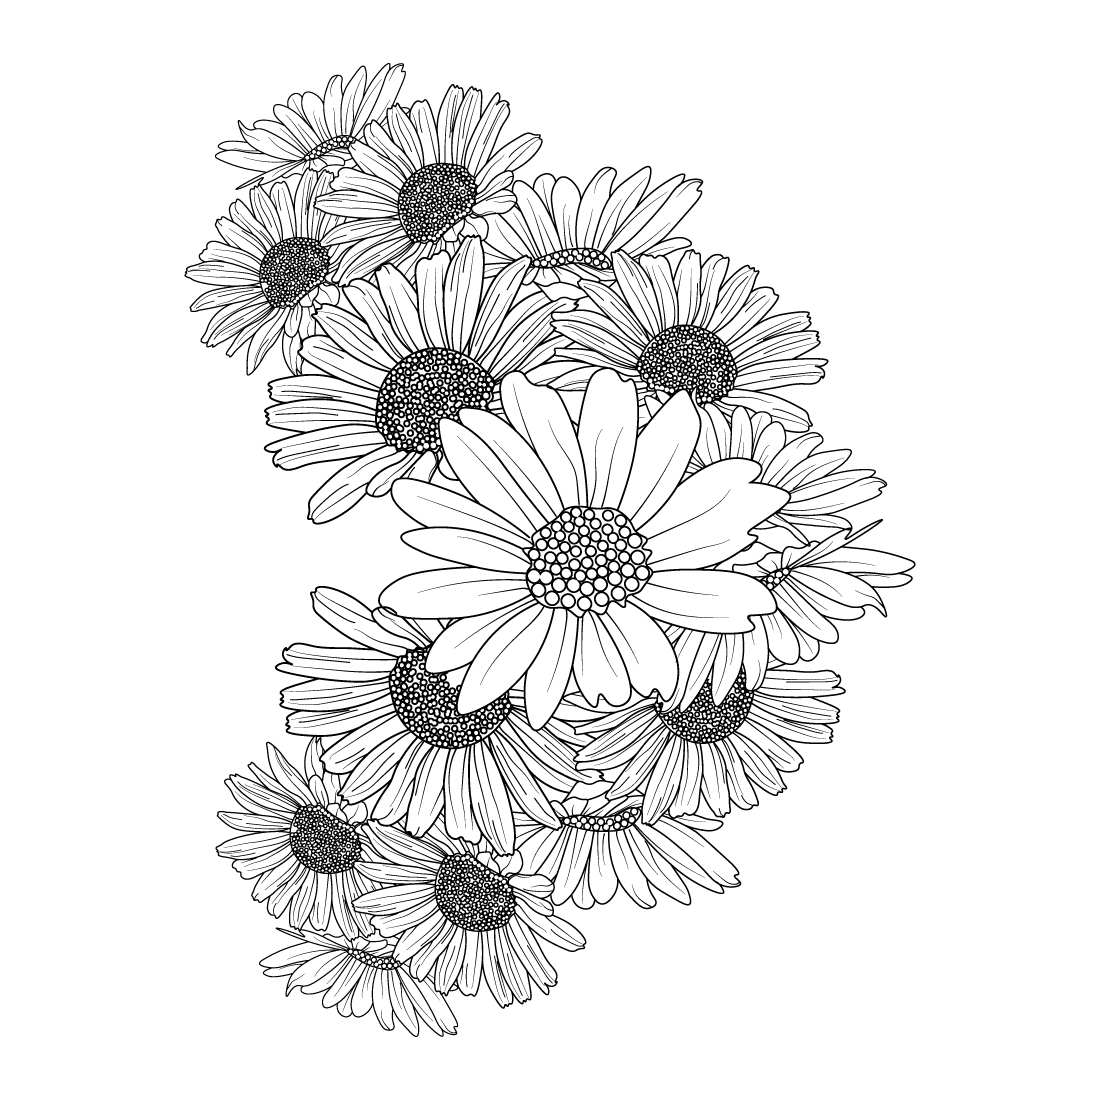 Daisy line drawing tattoo daisy flower drawing tattoo daisy line art, preview image.